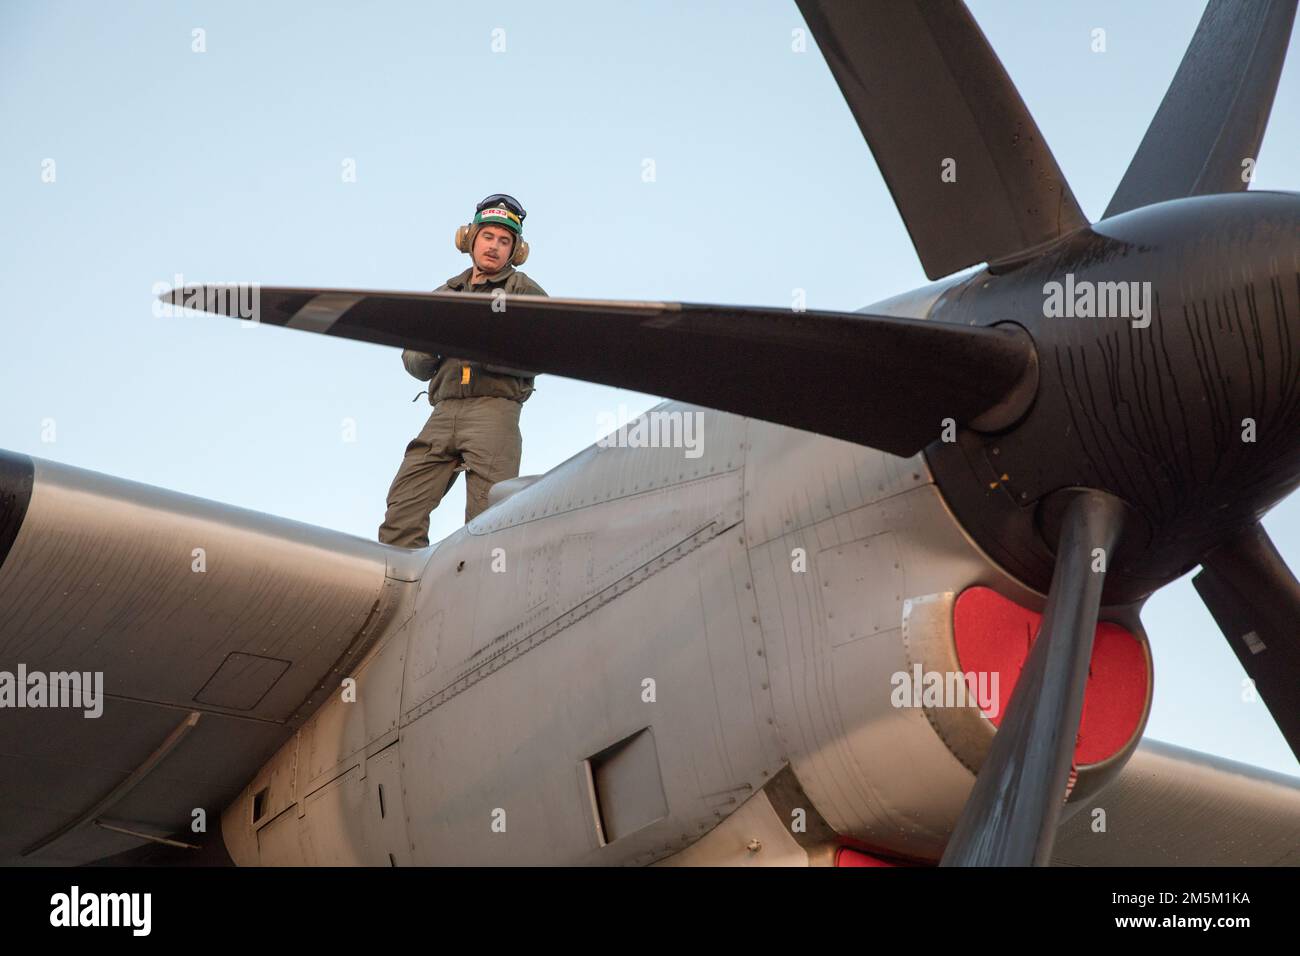 U.S. Marine Corps Sgt. Calvin Shirey, a loadmaster with Marine Aerial Refueler Transport Squadron (VMGR) 152, conducts preflight checks on a KC-130J Super Hercules at Yokota Air Force Base, Japan, March 24, 2022. Marines with VMGR-152 supported Marines with Marine Fighter Attack Squadron 121 during a training flight simulating close air support at Camp Fuji, Japan. Marine Corps aviation routinely conducts training throughout the region to remain combat-ready in support of a free and open Indo-Pacific and to demonstrate our commitment to the Treaty of Mutual Cooperation and Security between the Stock Photo